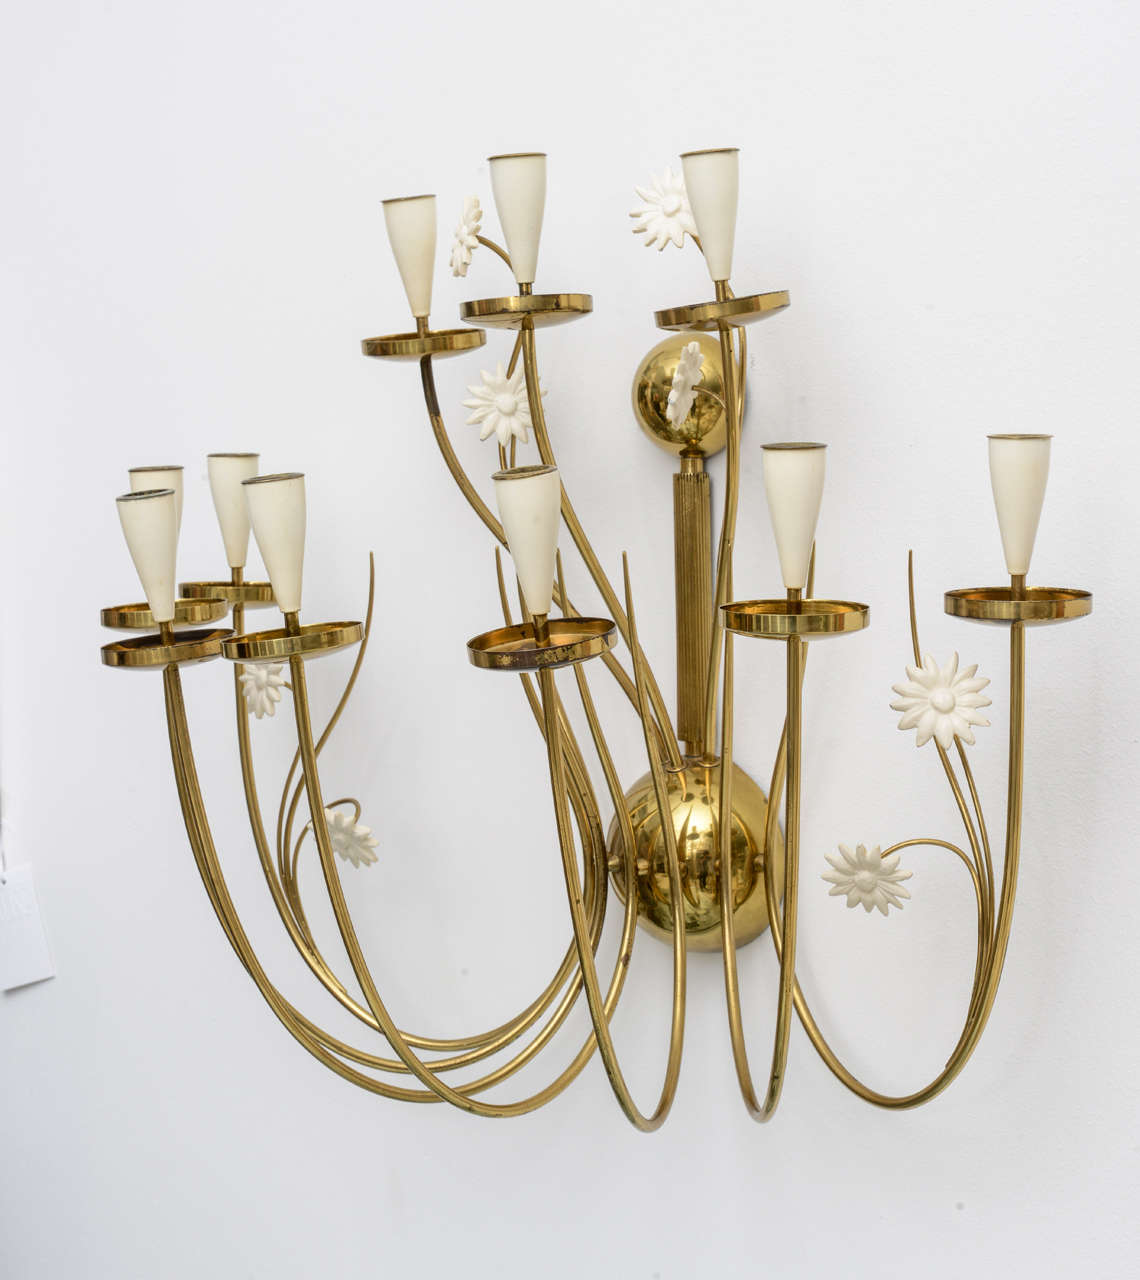 Our over-sized 50's Italian candle sconce delights the eye with delicately curving brass arms and whimsical white painted flowers... and did we mention its impressive scale? So charming with all 10 candles lit over a small sideboard or soaking tub!